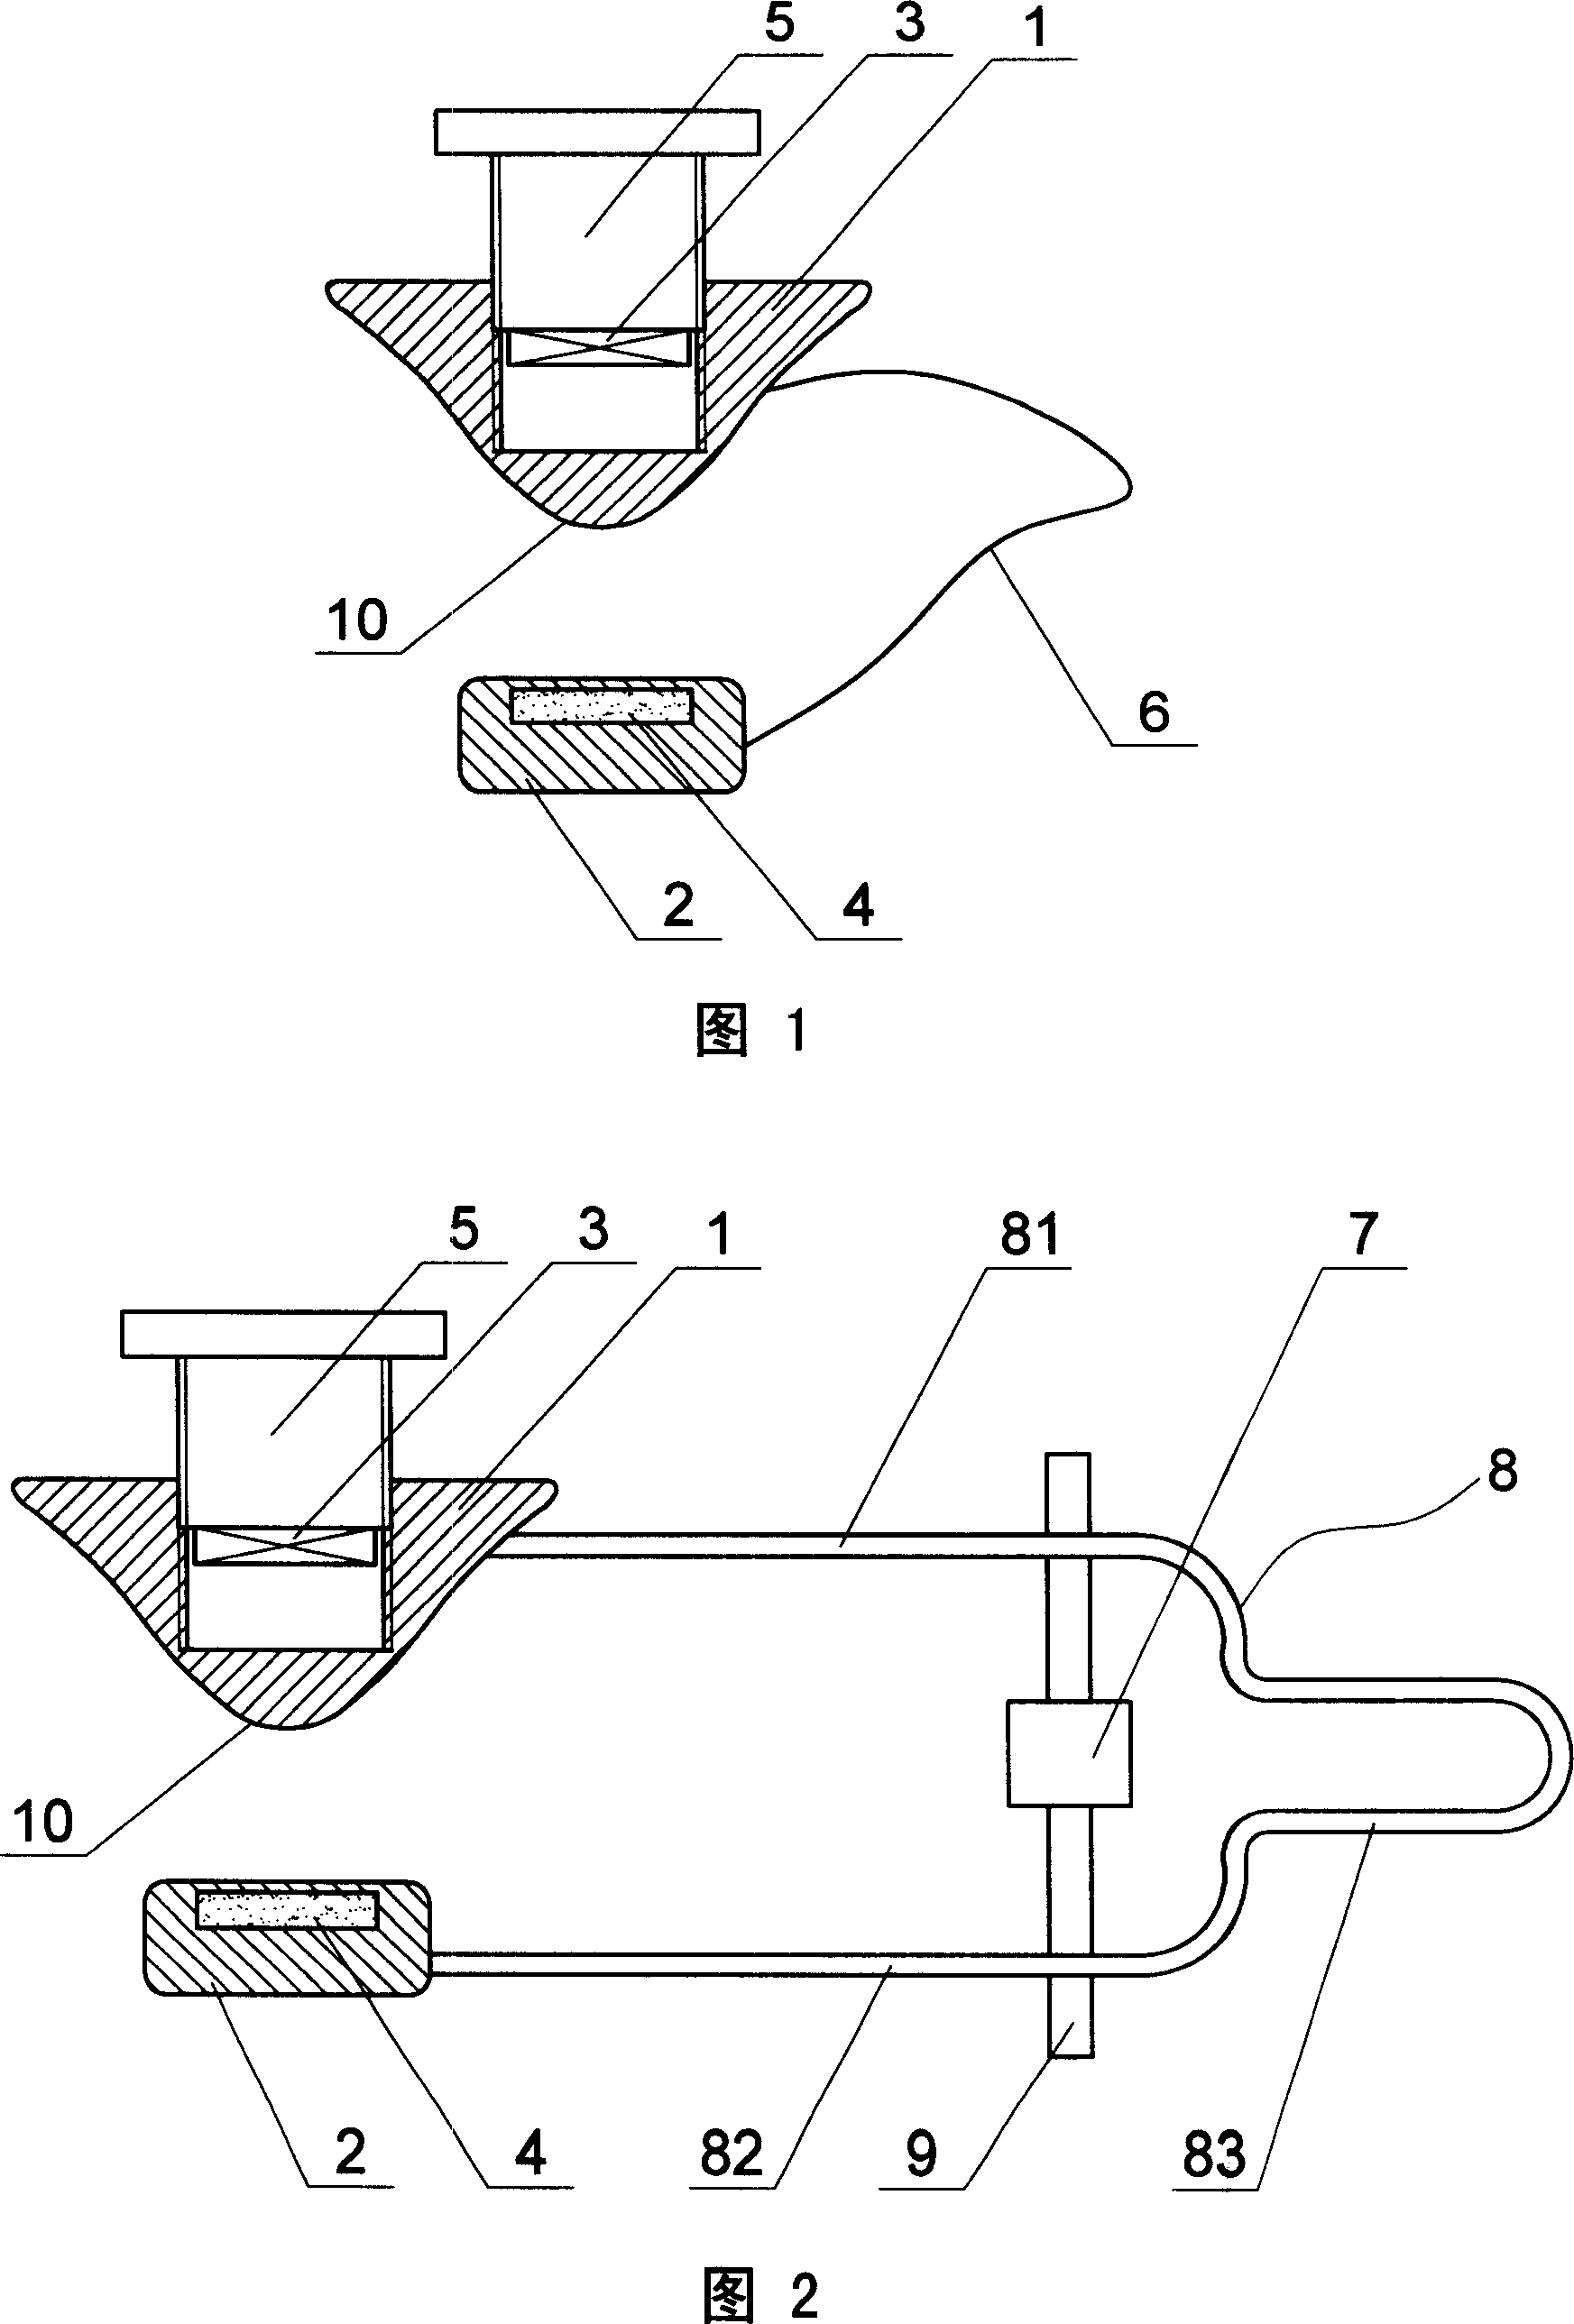 Dimple forming device